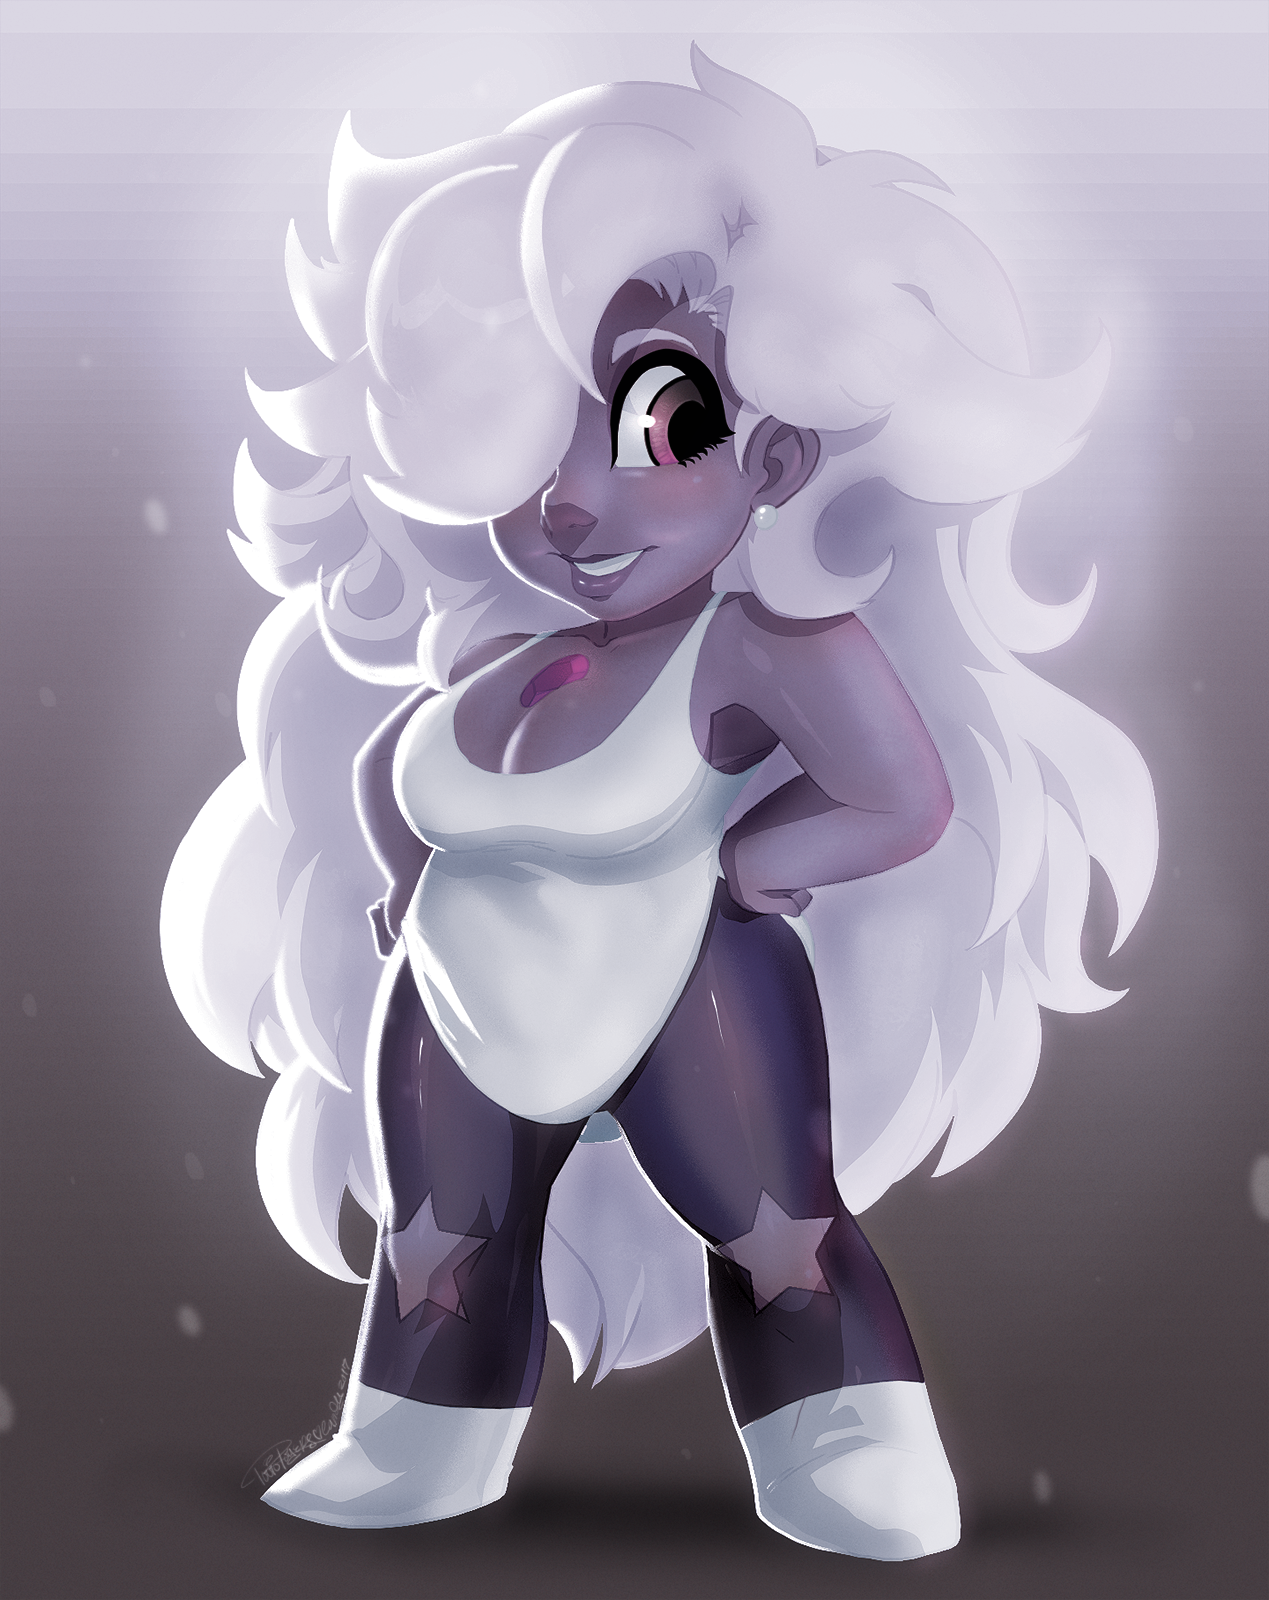 the amethyst i did the other day. psd will be available on patreon soon.